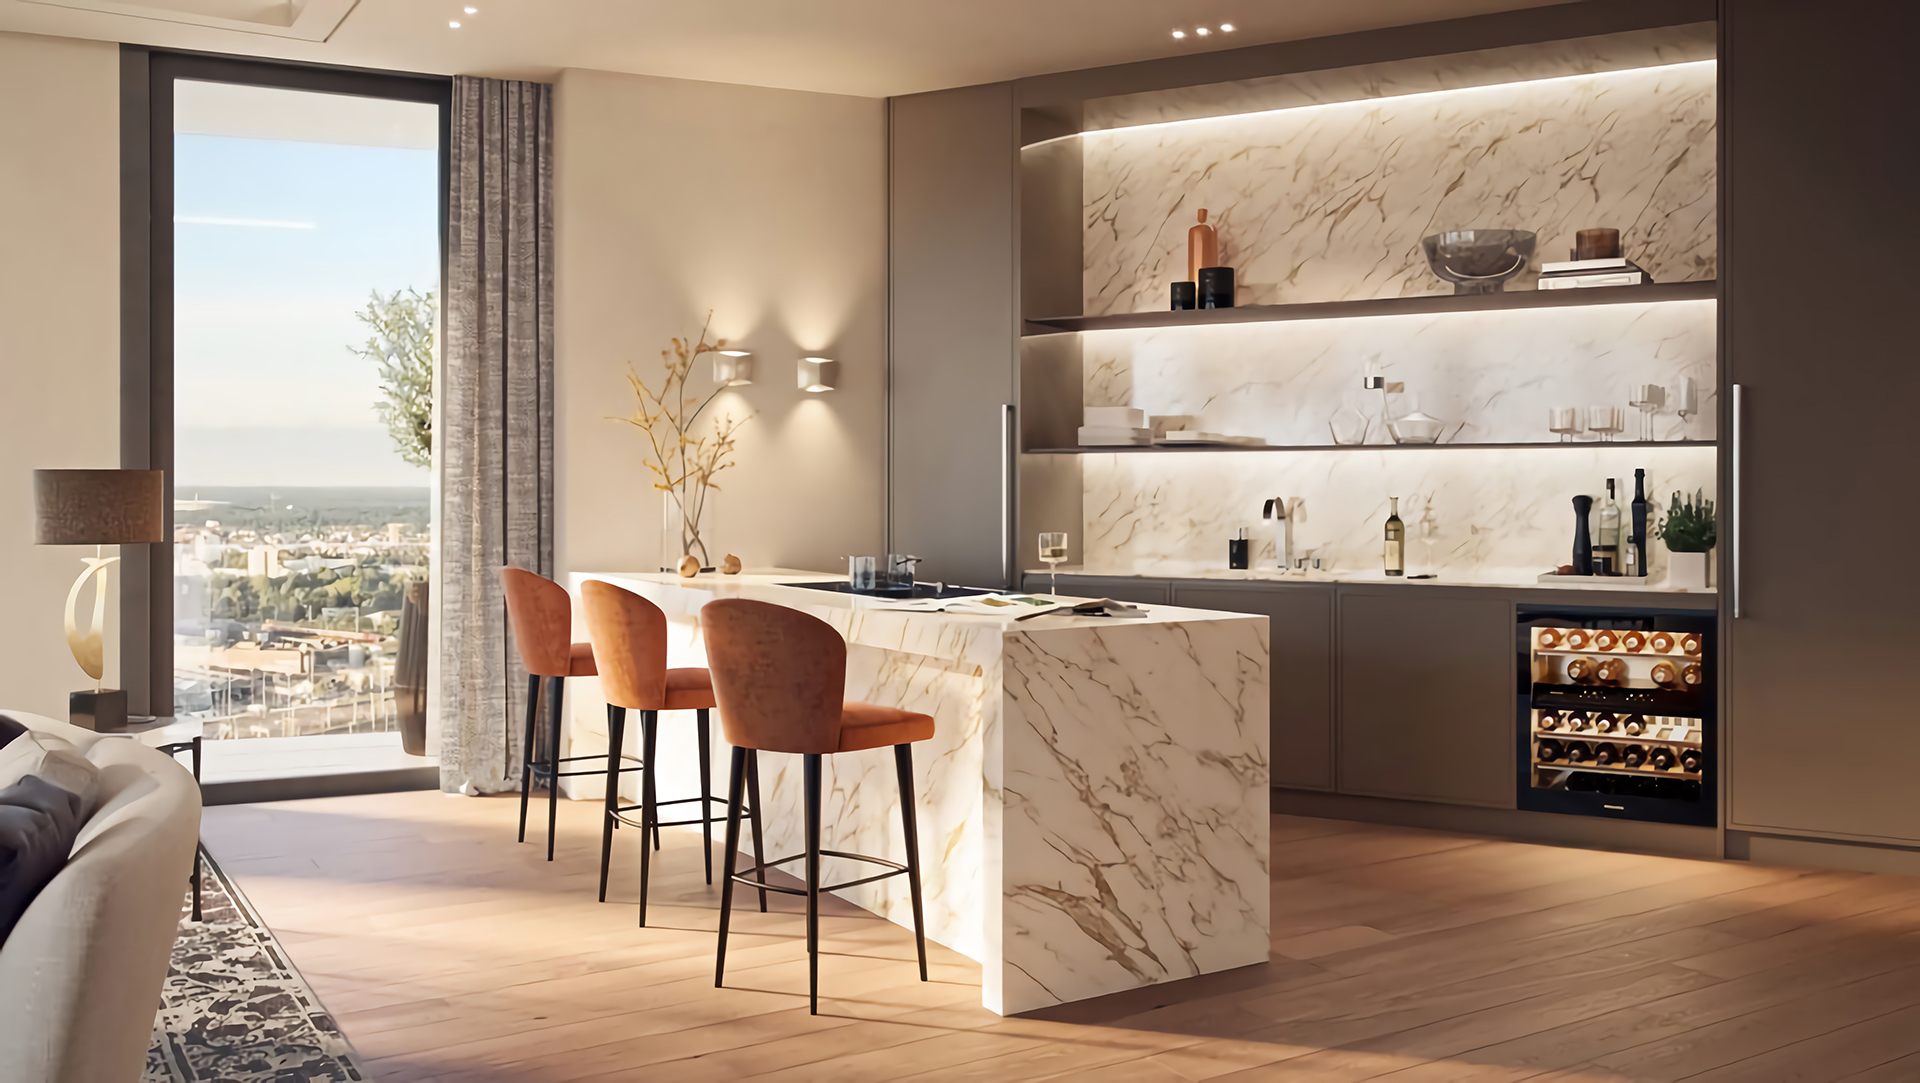 Individual solutions, perfect craftsmanship and unique kitchen design from SieMatic